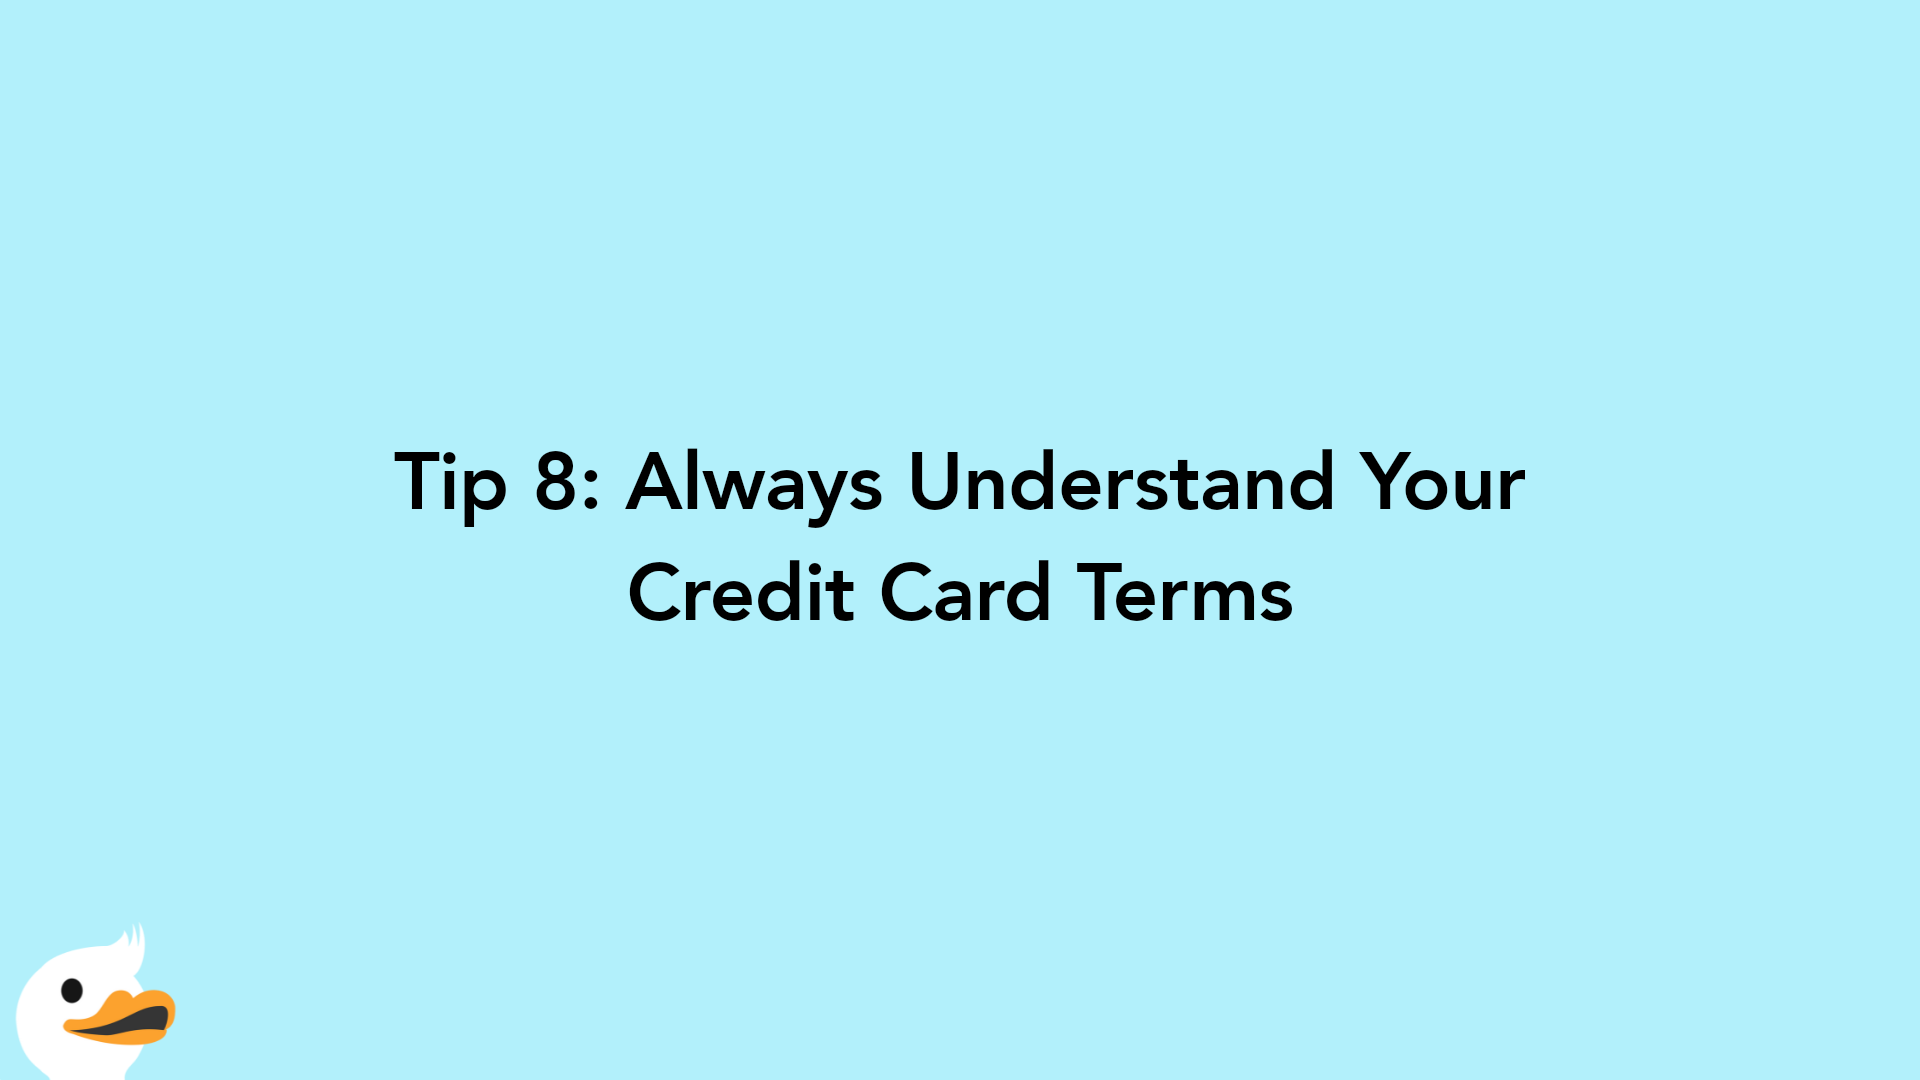 Tip 8: Always Understand Your Credit Card Terms